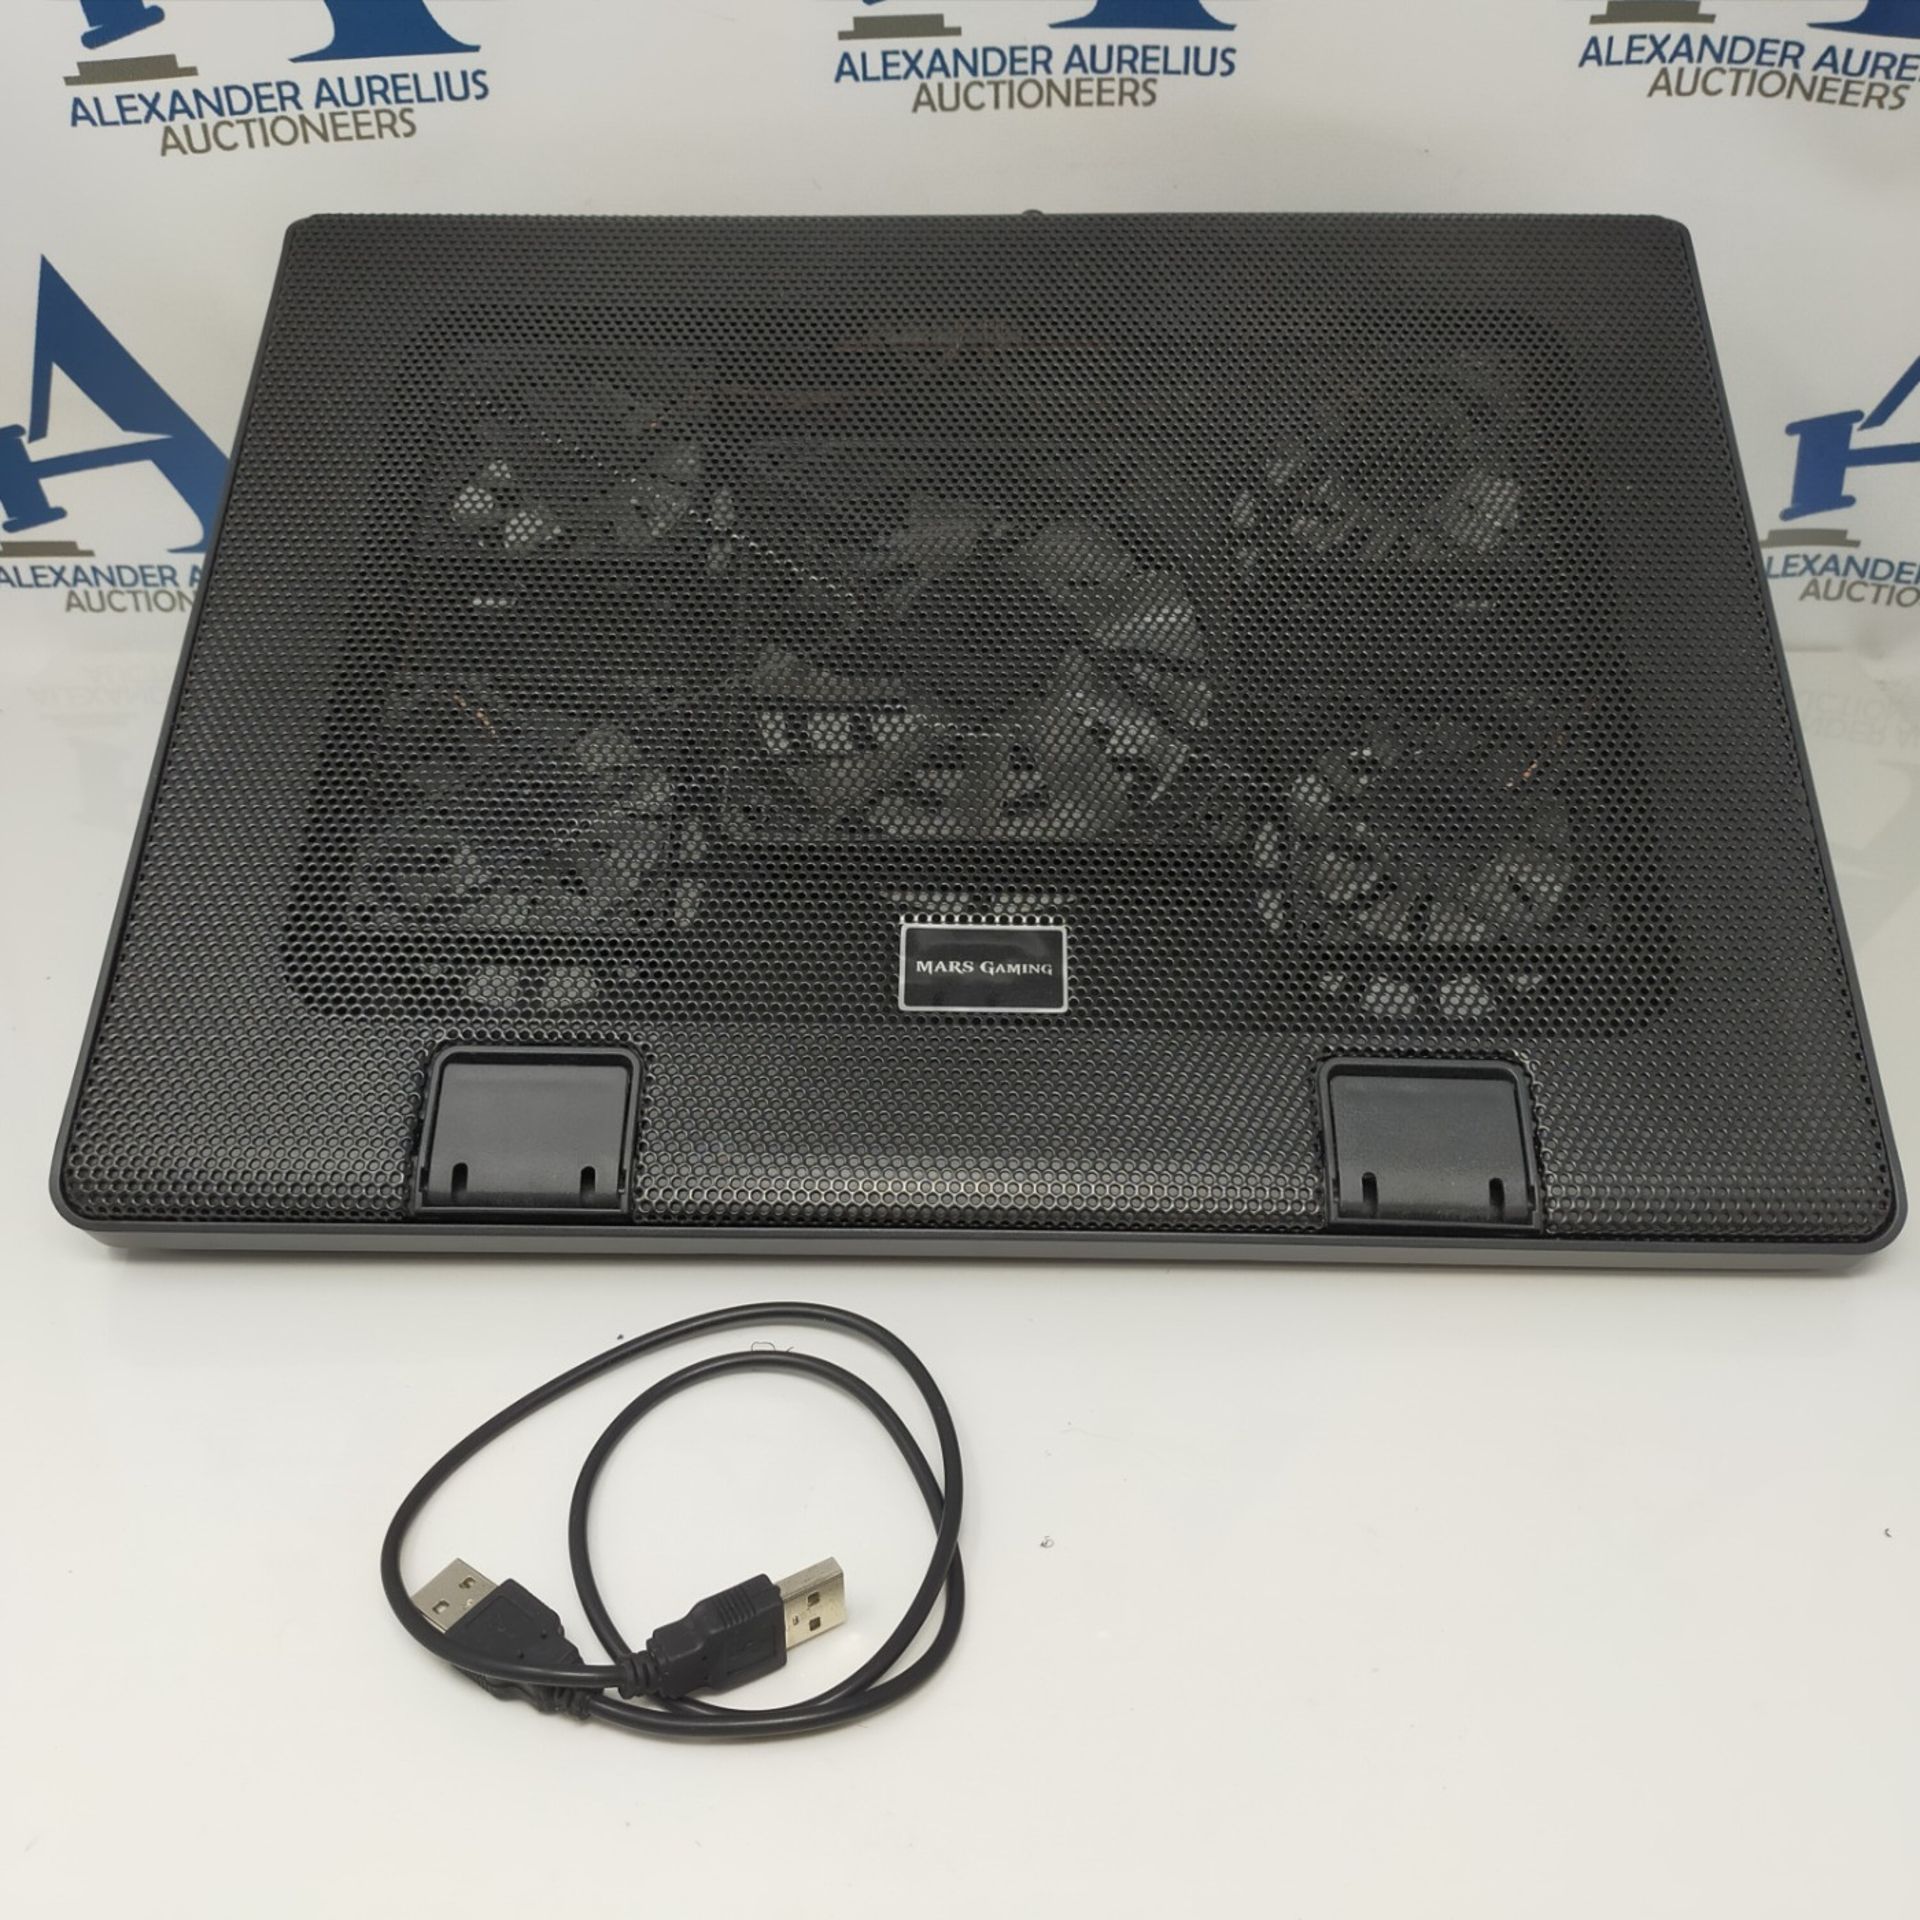 Mars Gaming MNBC2 Cooling Base for Gaming Laptops up to 17.35 inches (5 Ultra-Silent F - Image 3 of 3